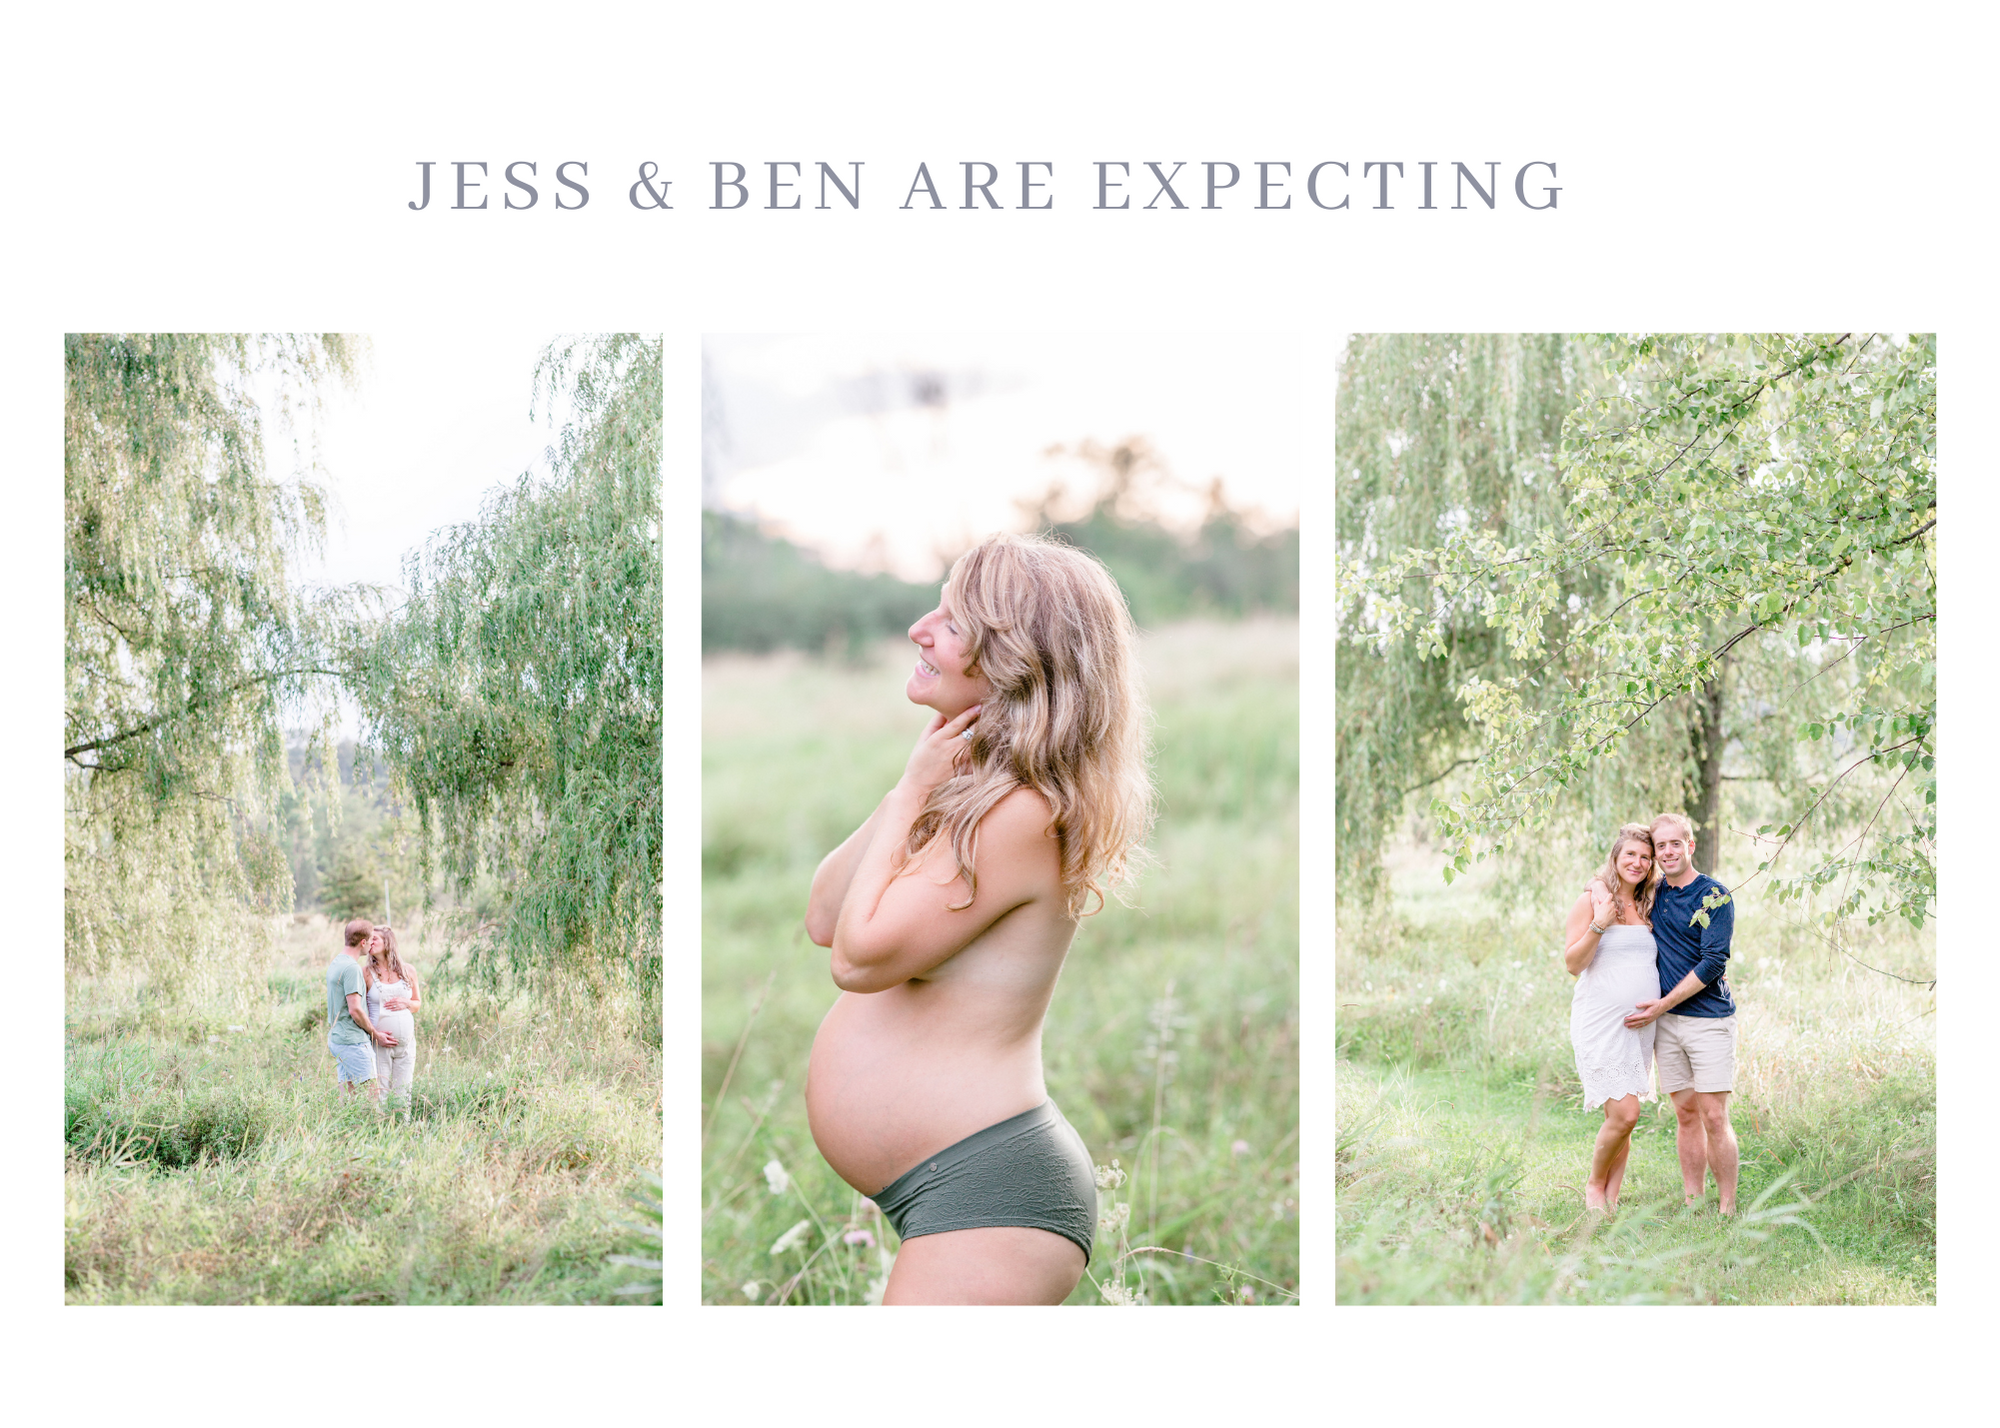 Vermont maternity photography shoot